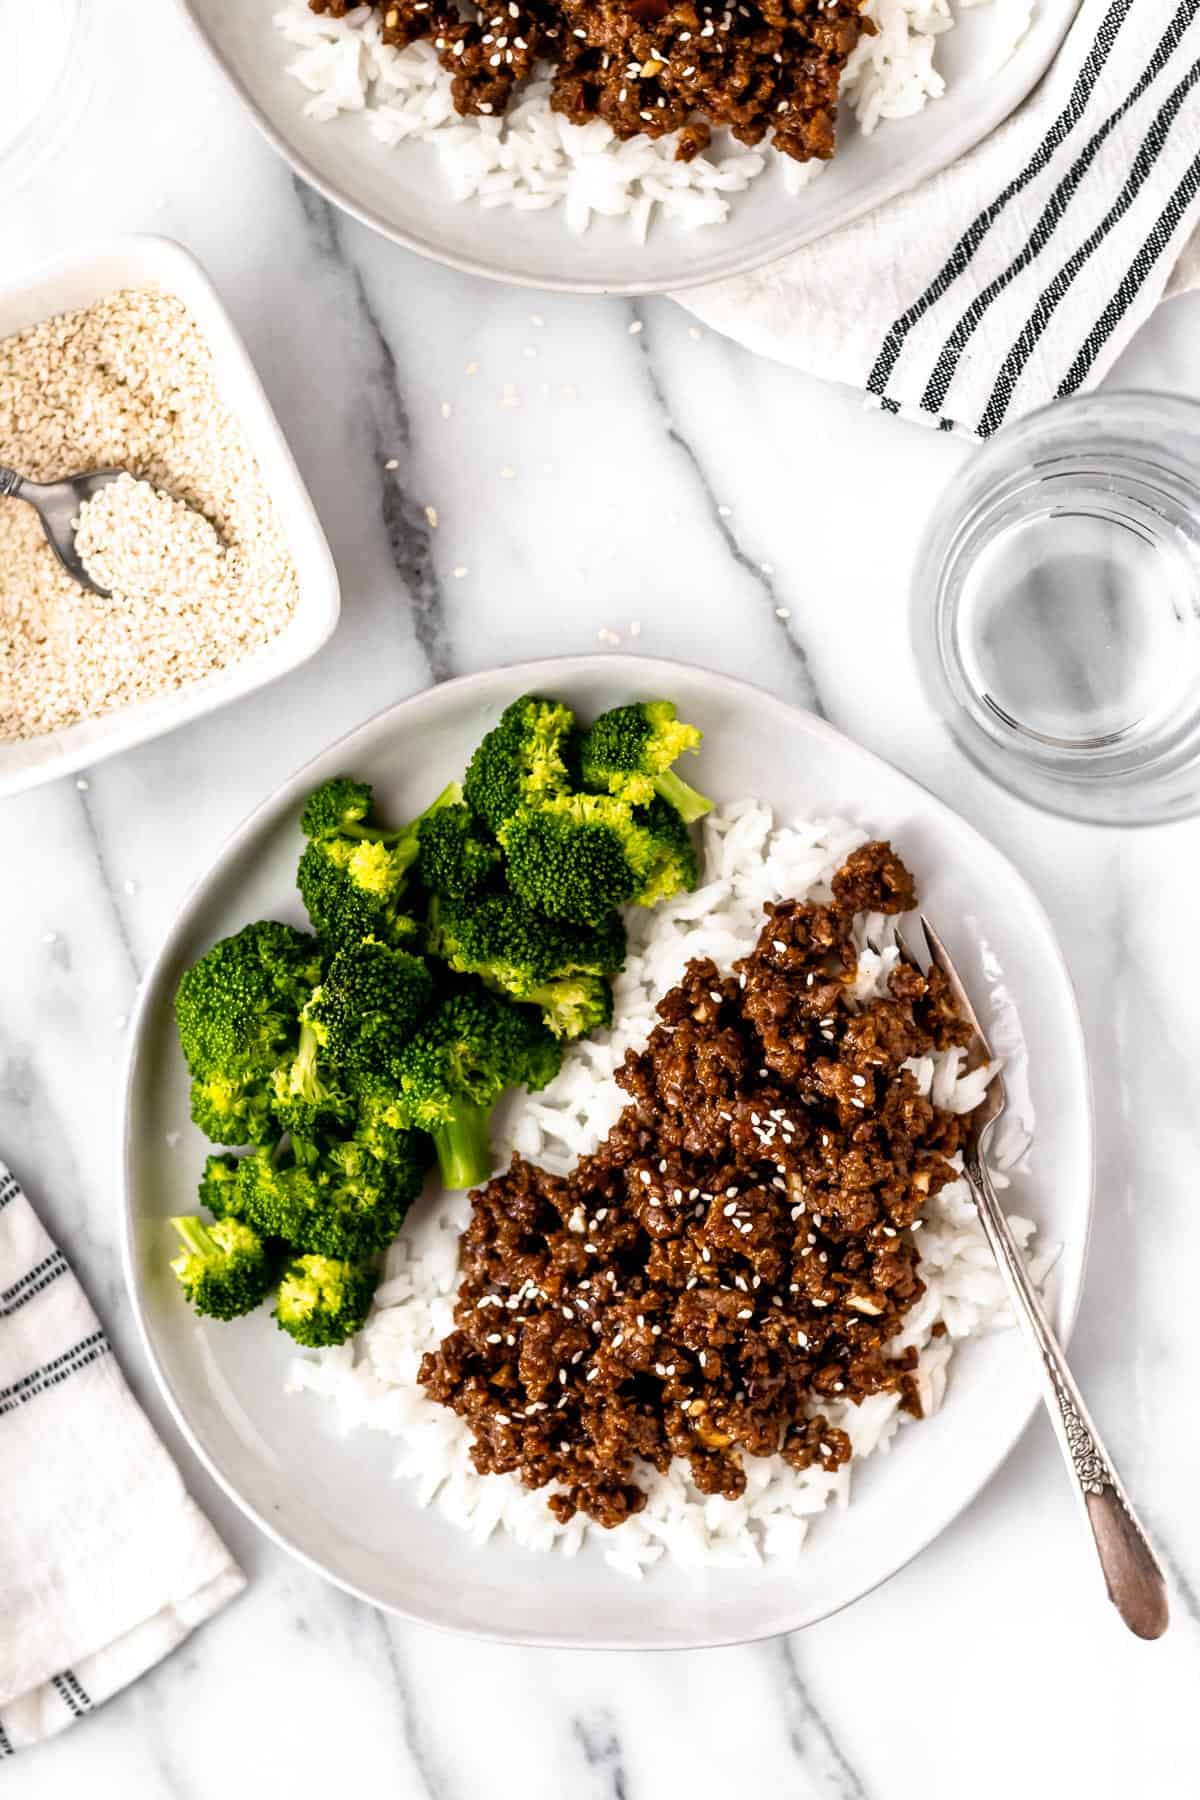 Overhead of a plate of Mongolian ground beef on rice with broccoli, a second plate partially showing and 2 towels, a glass of water and sesame seeds around the plates.